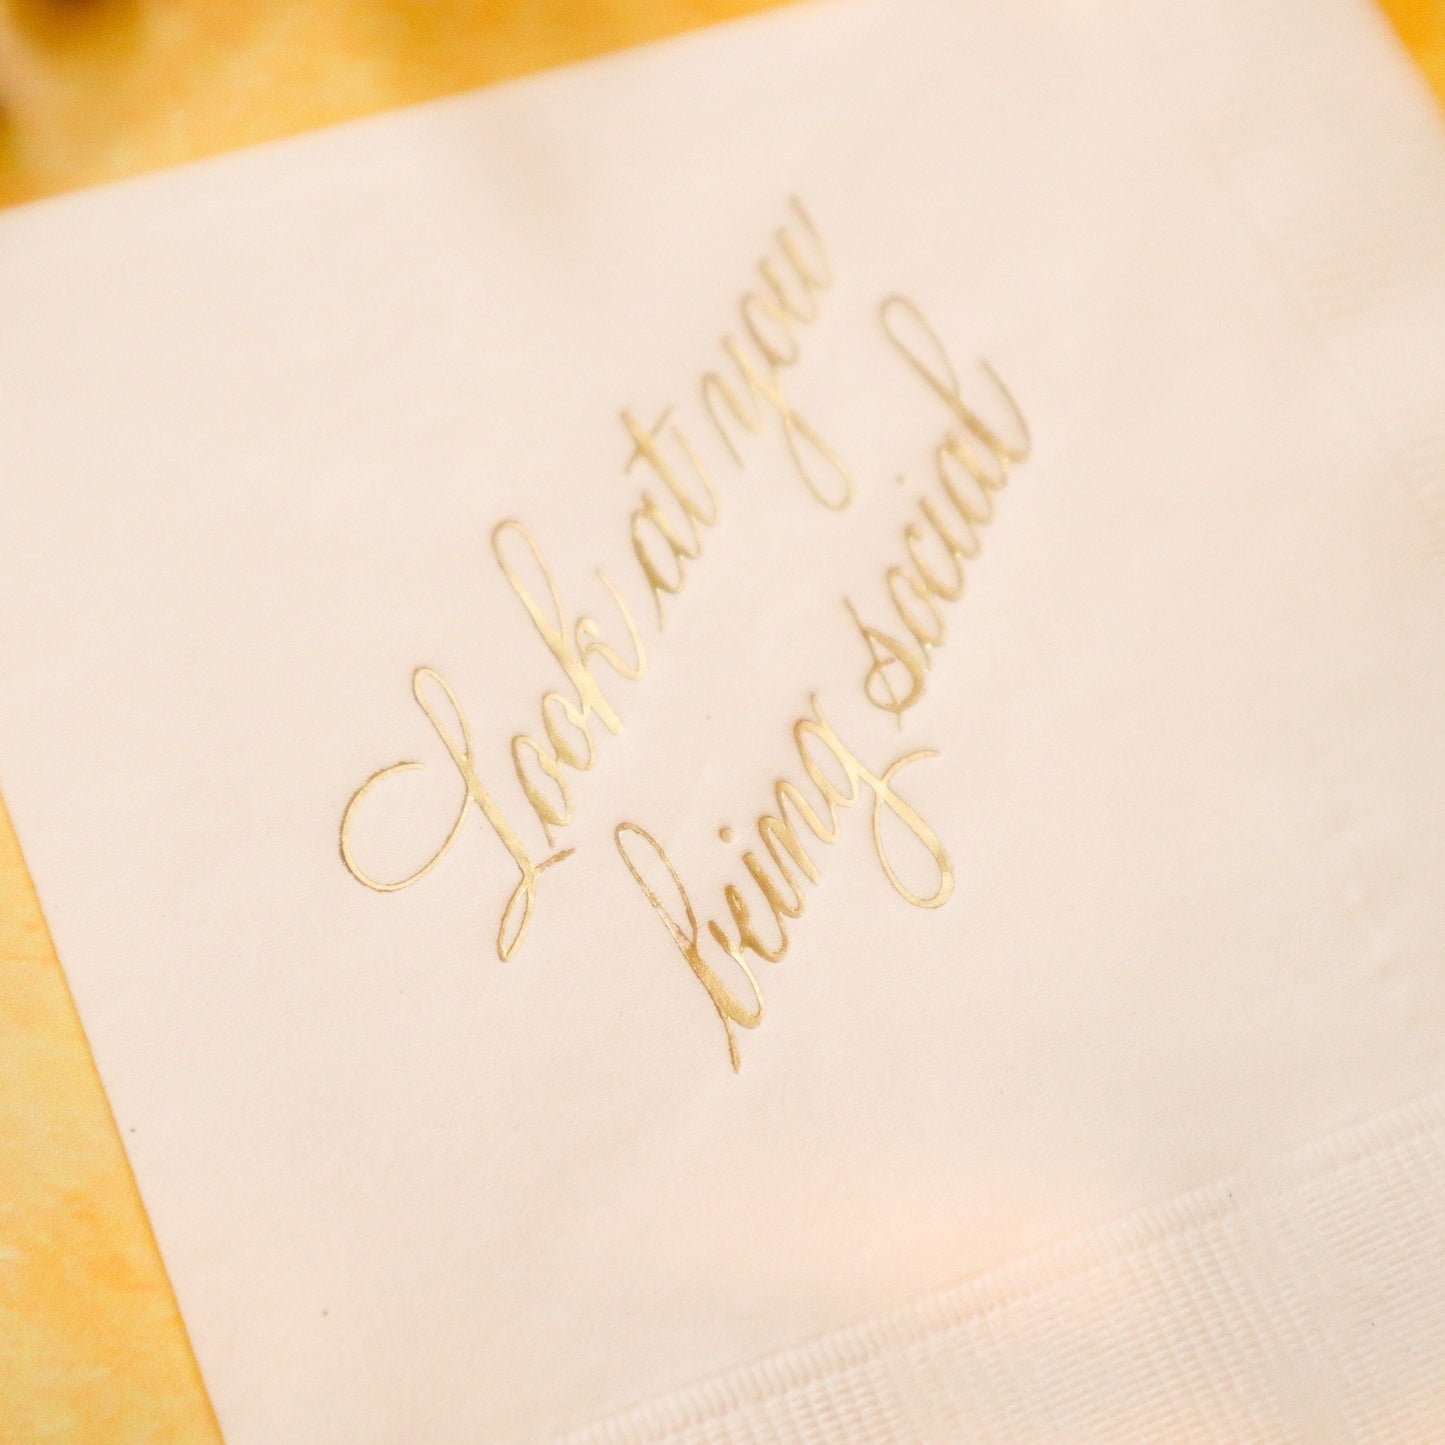 Look at you being social party napkins